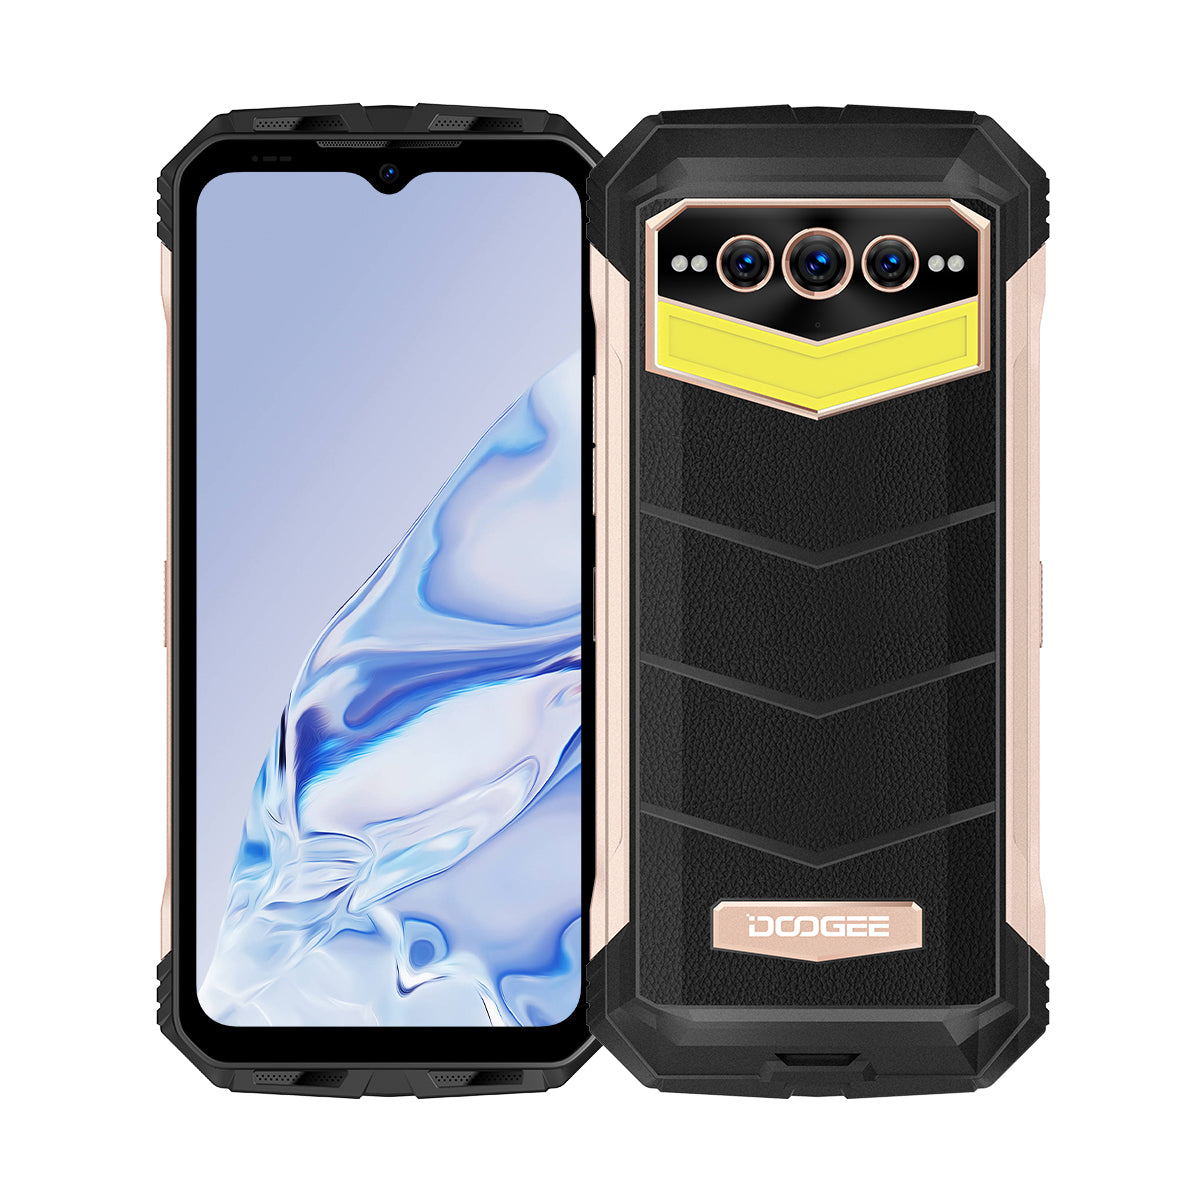 DOOGEE S100 Pro Camping lights 22000mAh Large battery Rugged Phone